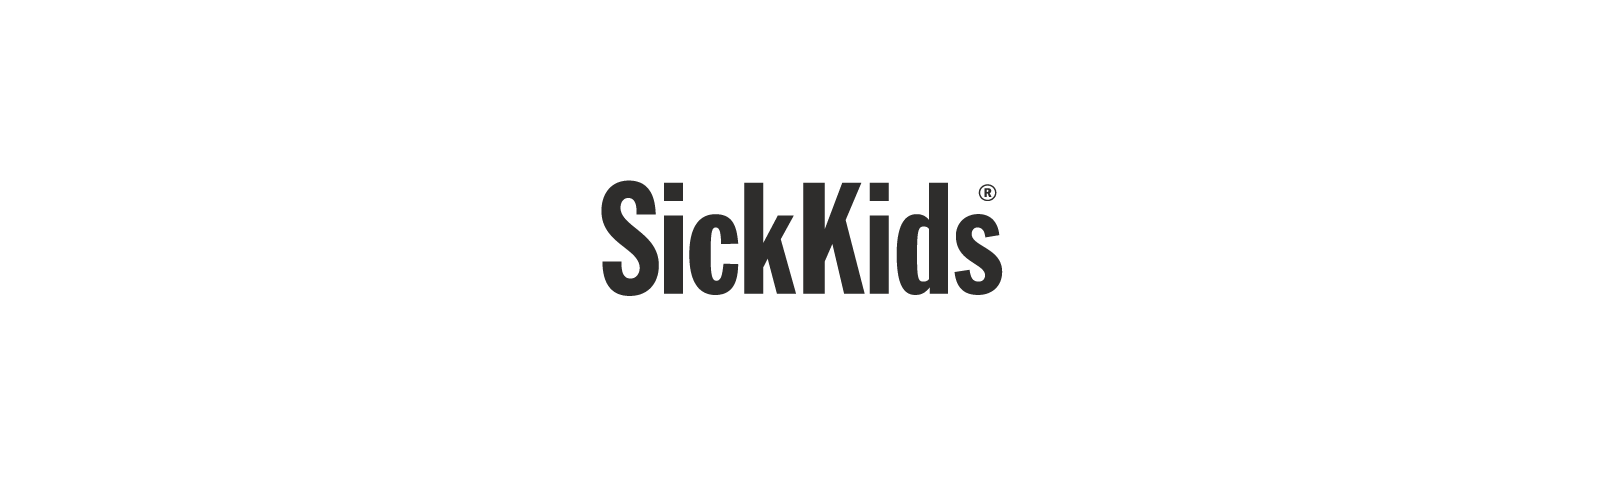 SikKids